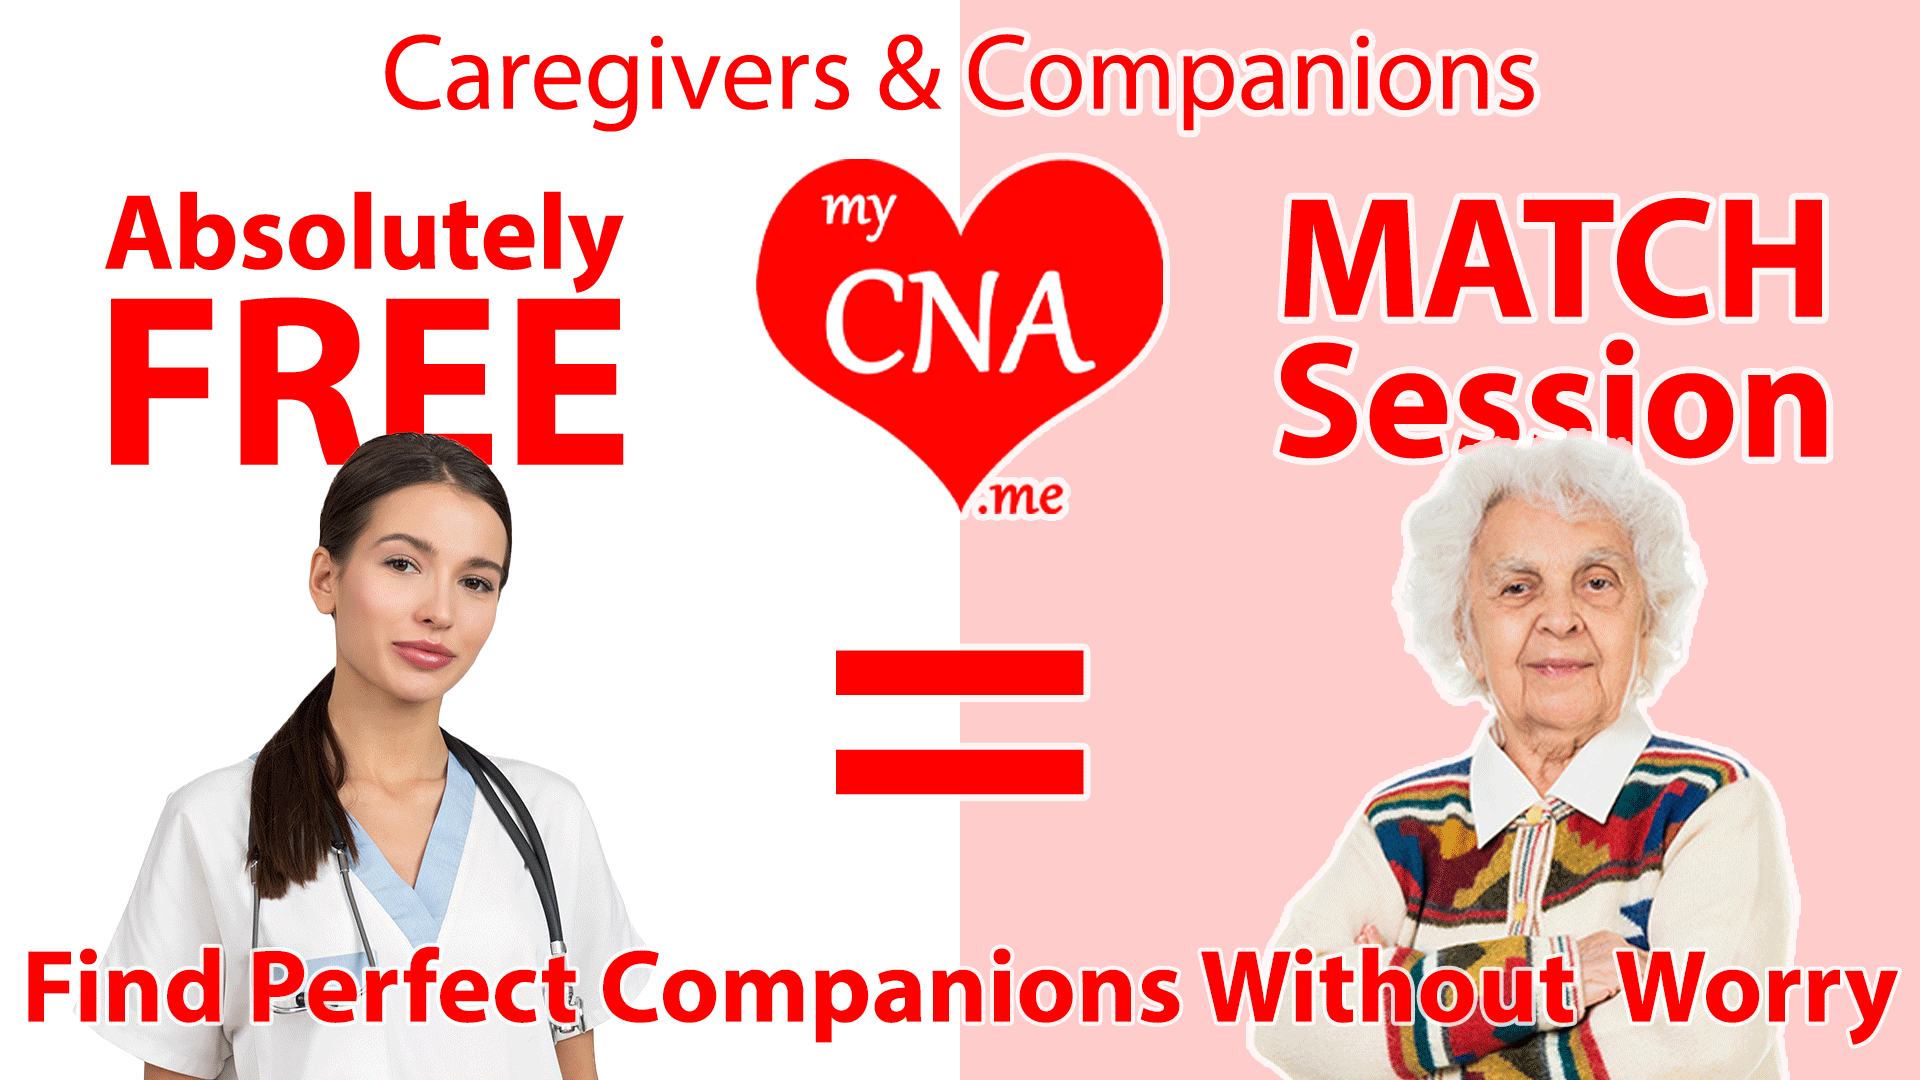 caregivers-and-companions-services-free-caregiver match-session-houston-texas-4